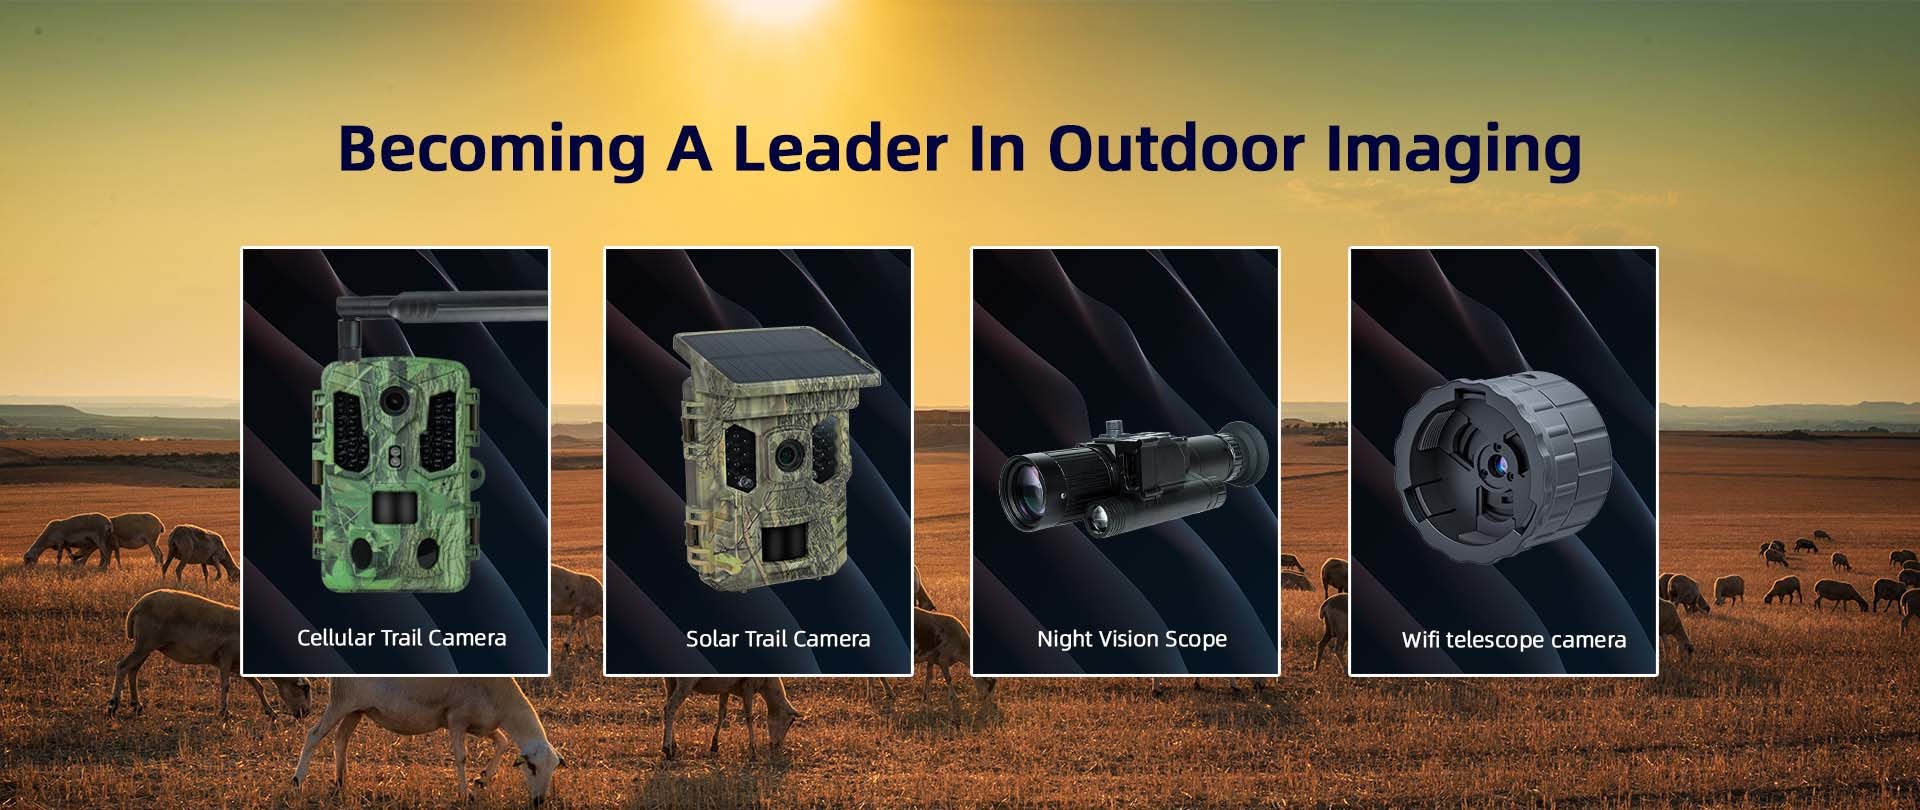 Becoming A Leader In Outdoor Imaging